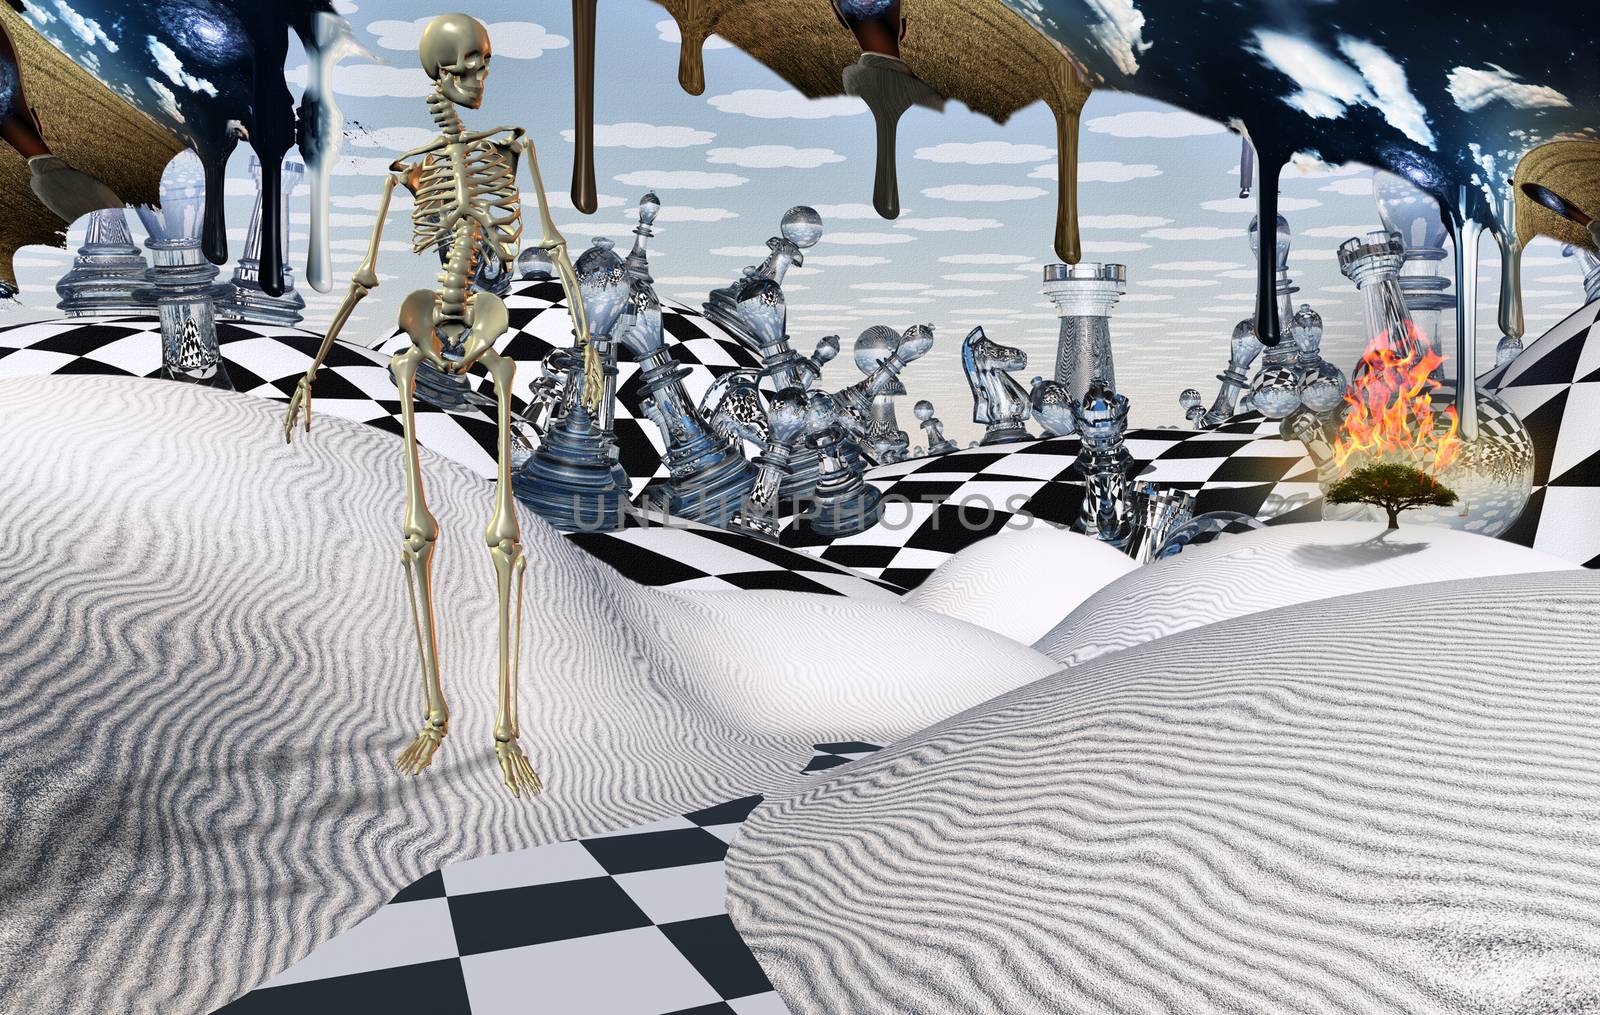 Surreal desert with chess figures. Eagle in the sky. Skeleton and burning tree. Another dimension flowing down. 3D rendering